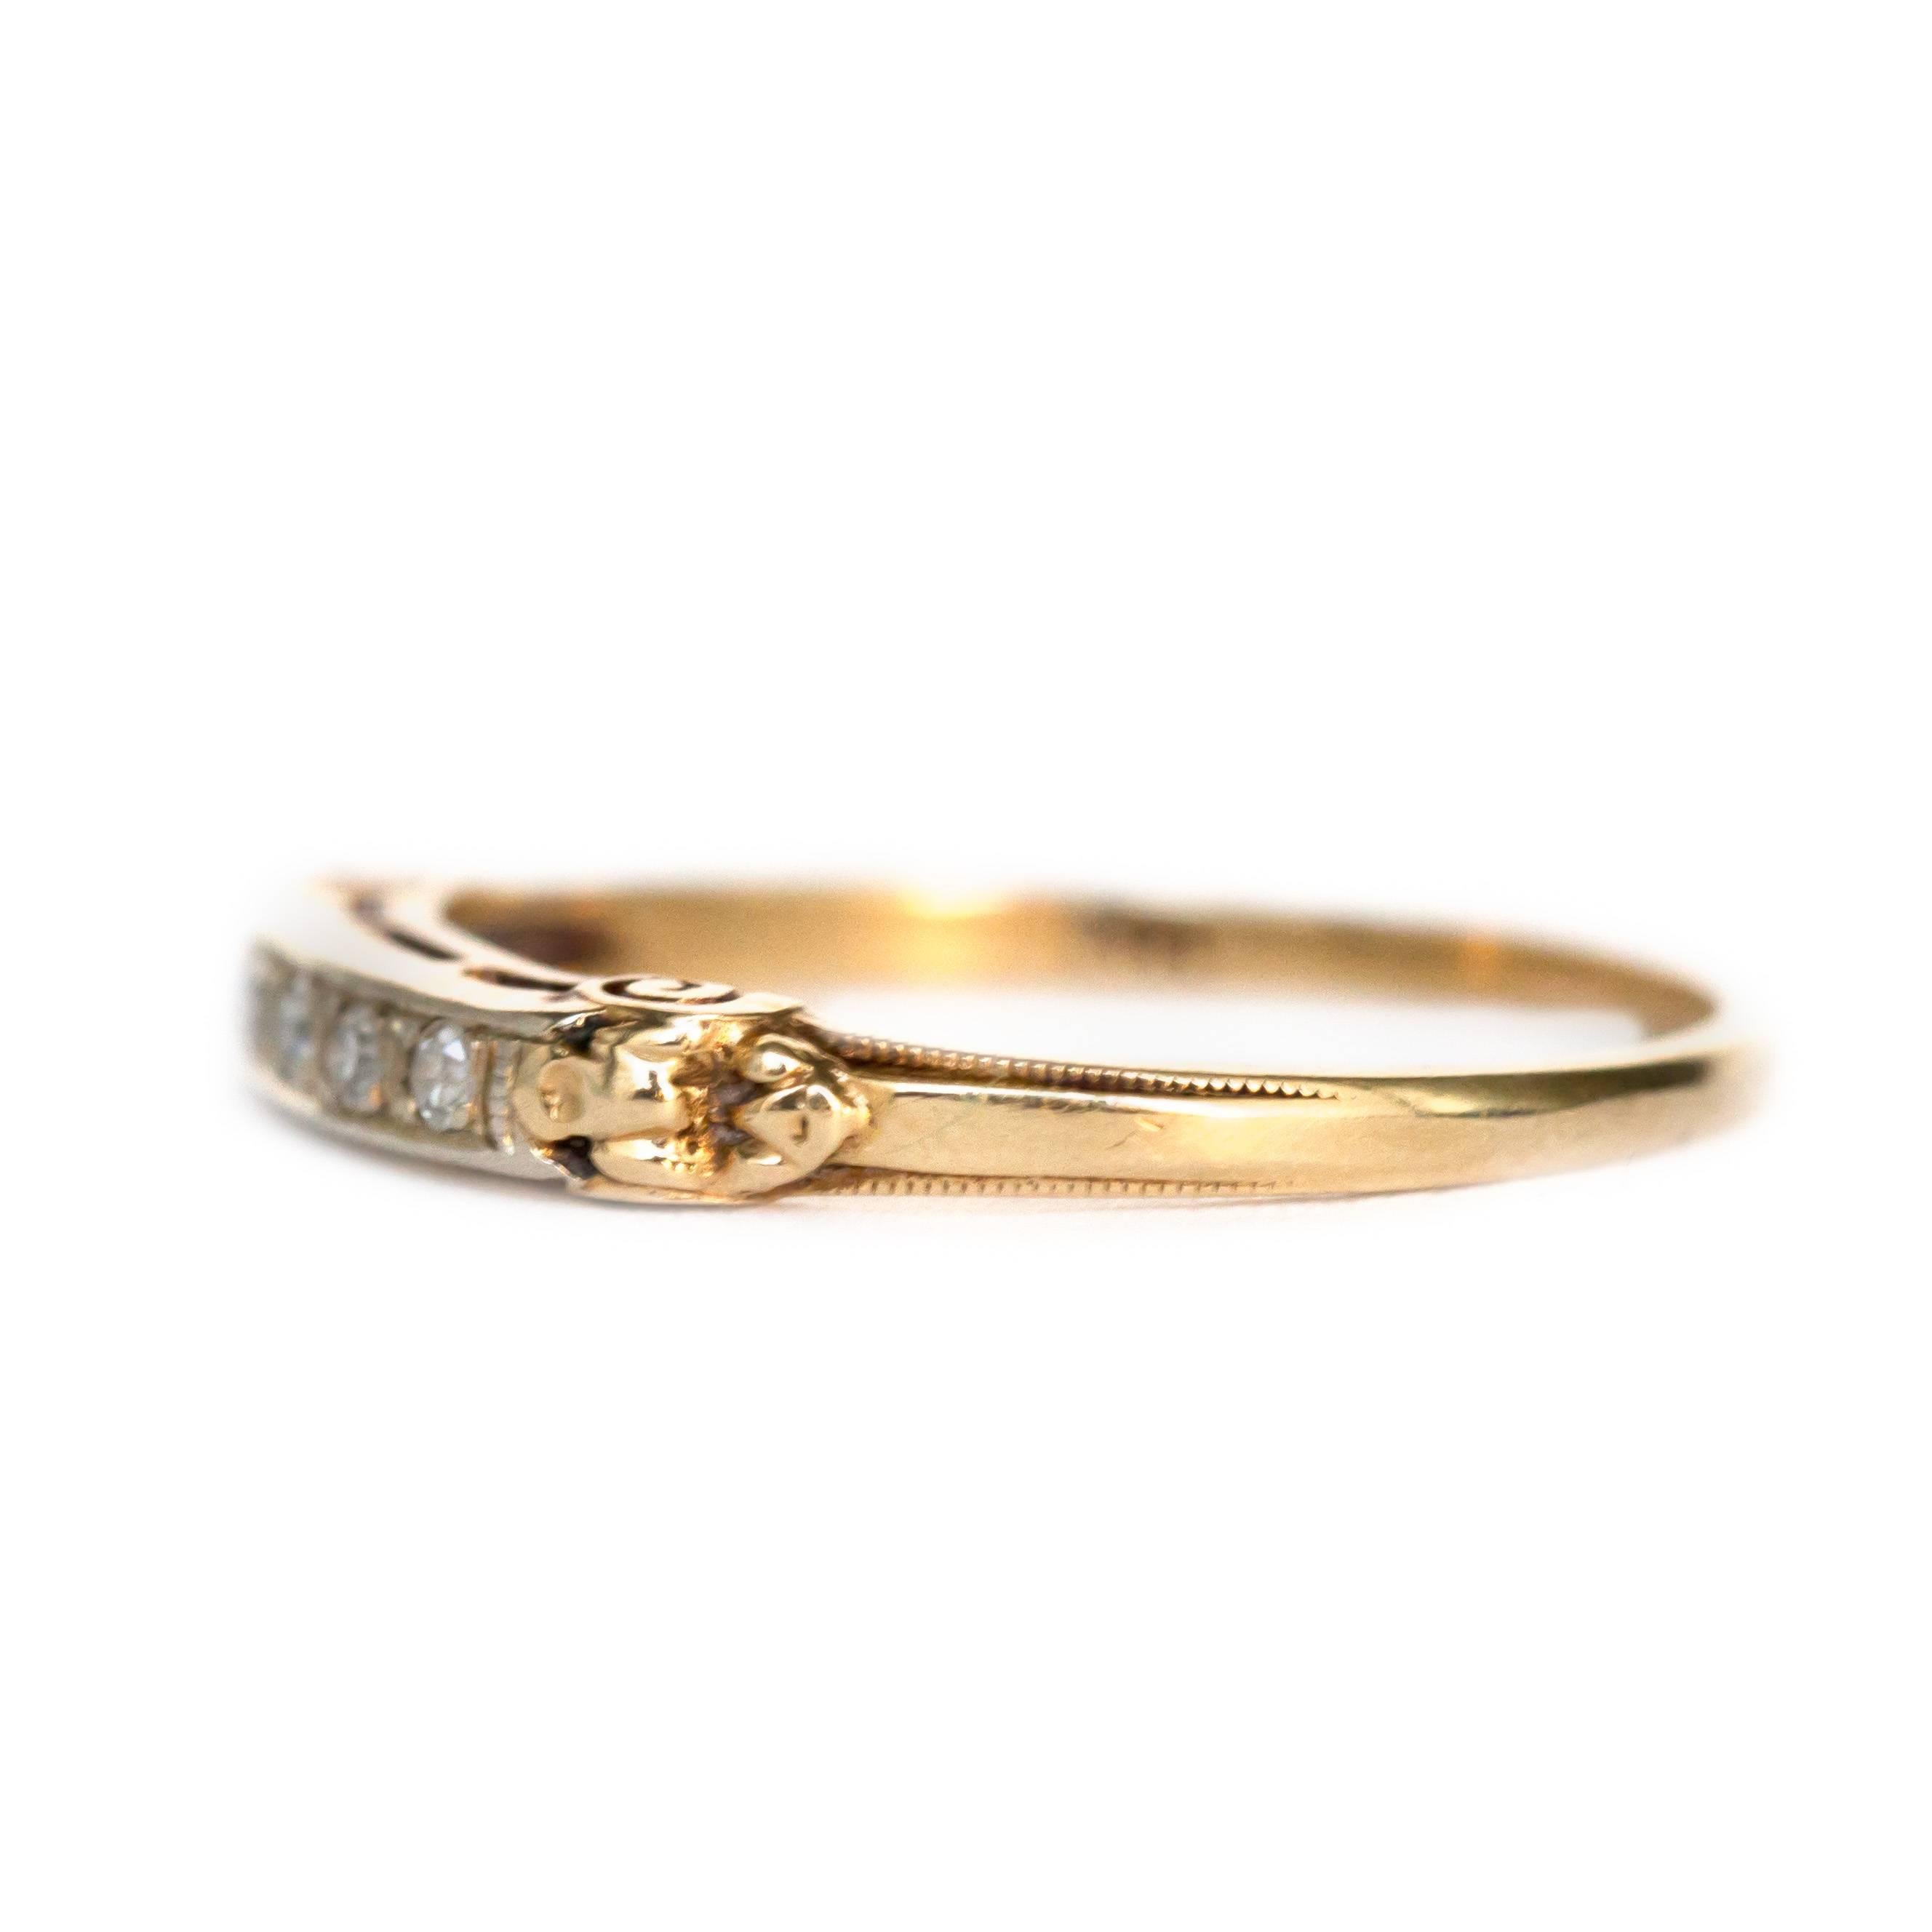 Item Details: 
Ring Size: 6.25
Metal Type: 14 Karat Yellow Gold
Weight: 1.3 grams

Side Stone Details: 
Shape: Antique Single Cut 
Total Carat Weight: .06 carat total weight 
Color: G
Clarity: VS

Finger to Top of Stone Measurement: 5.70 mm
